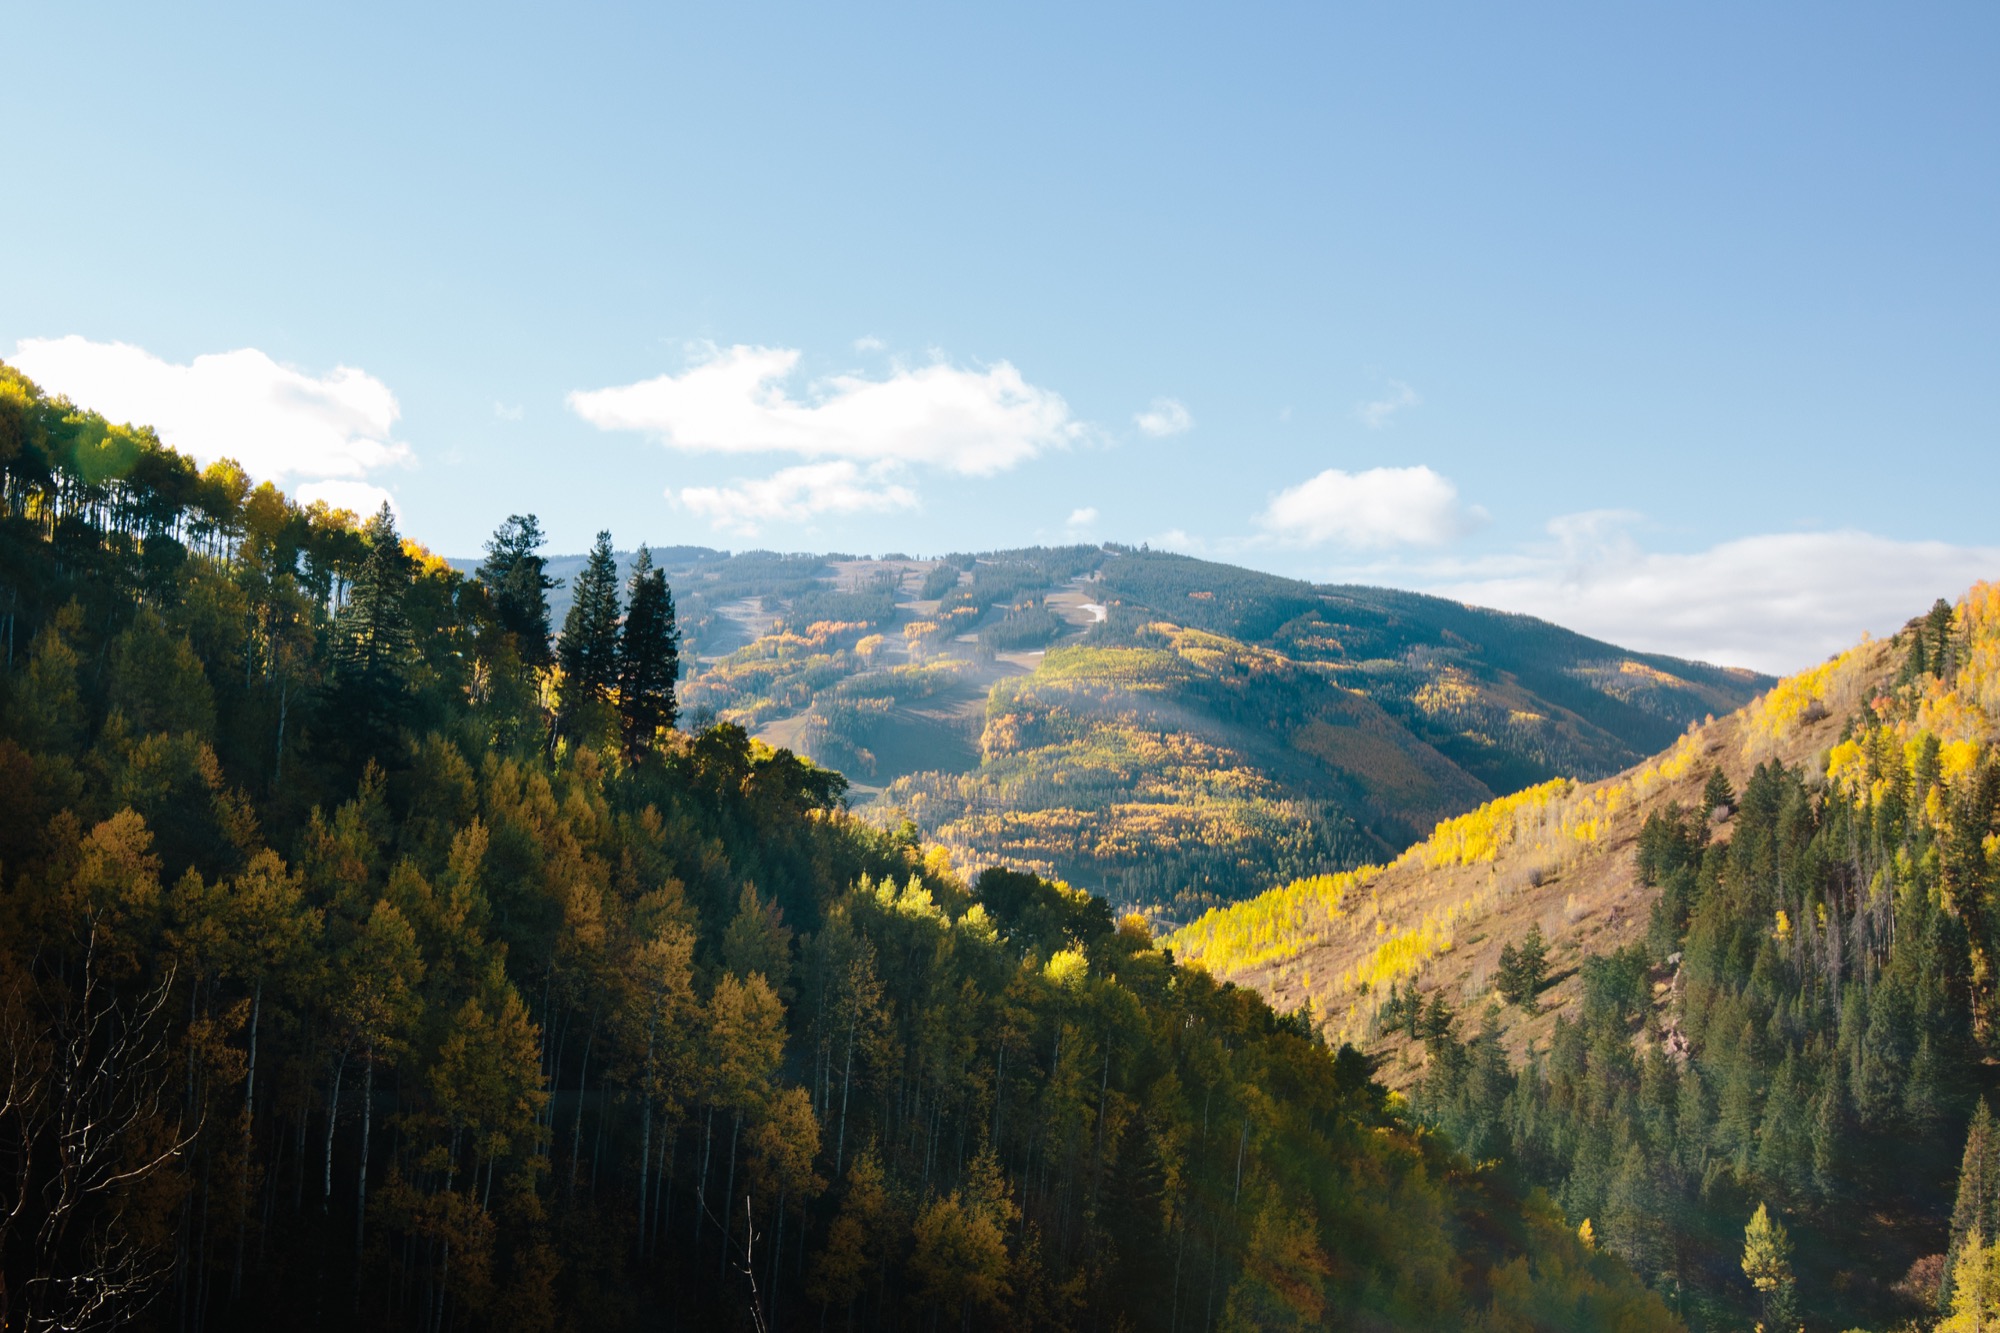 Fall in Colorado: Just outside of Vail on a bumpy country road, my opened up to the green and gold aspens that glimmered in the sunlight / Photo by Grant Lemons